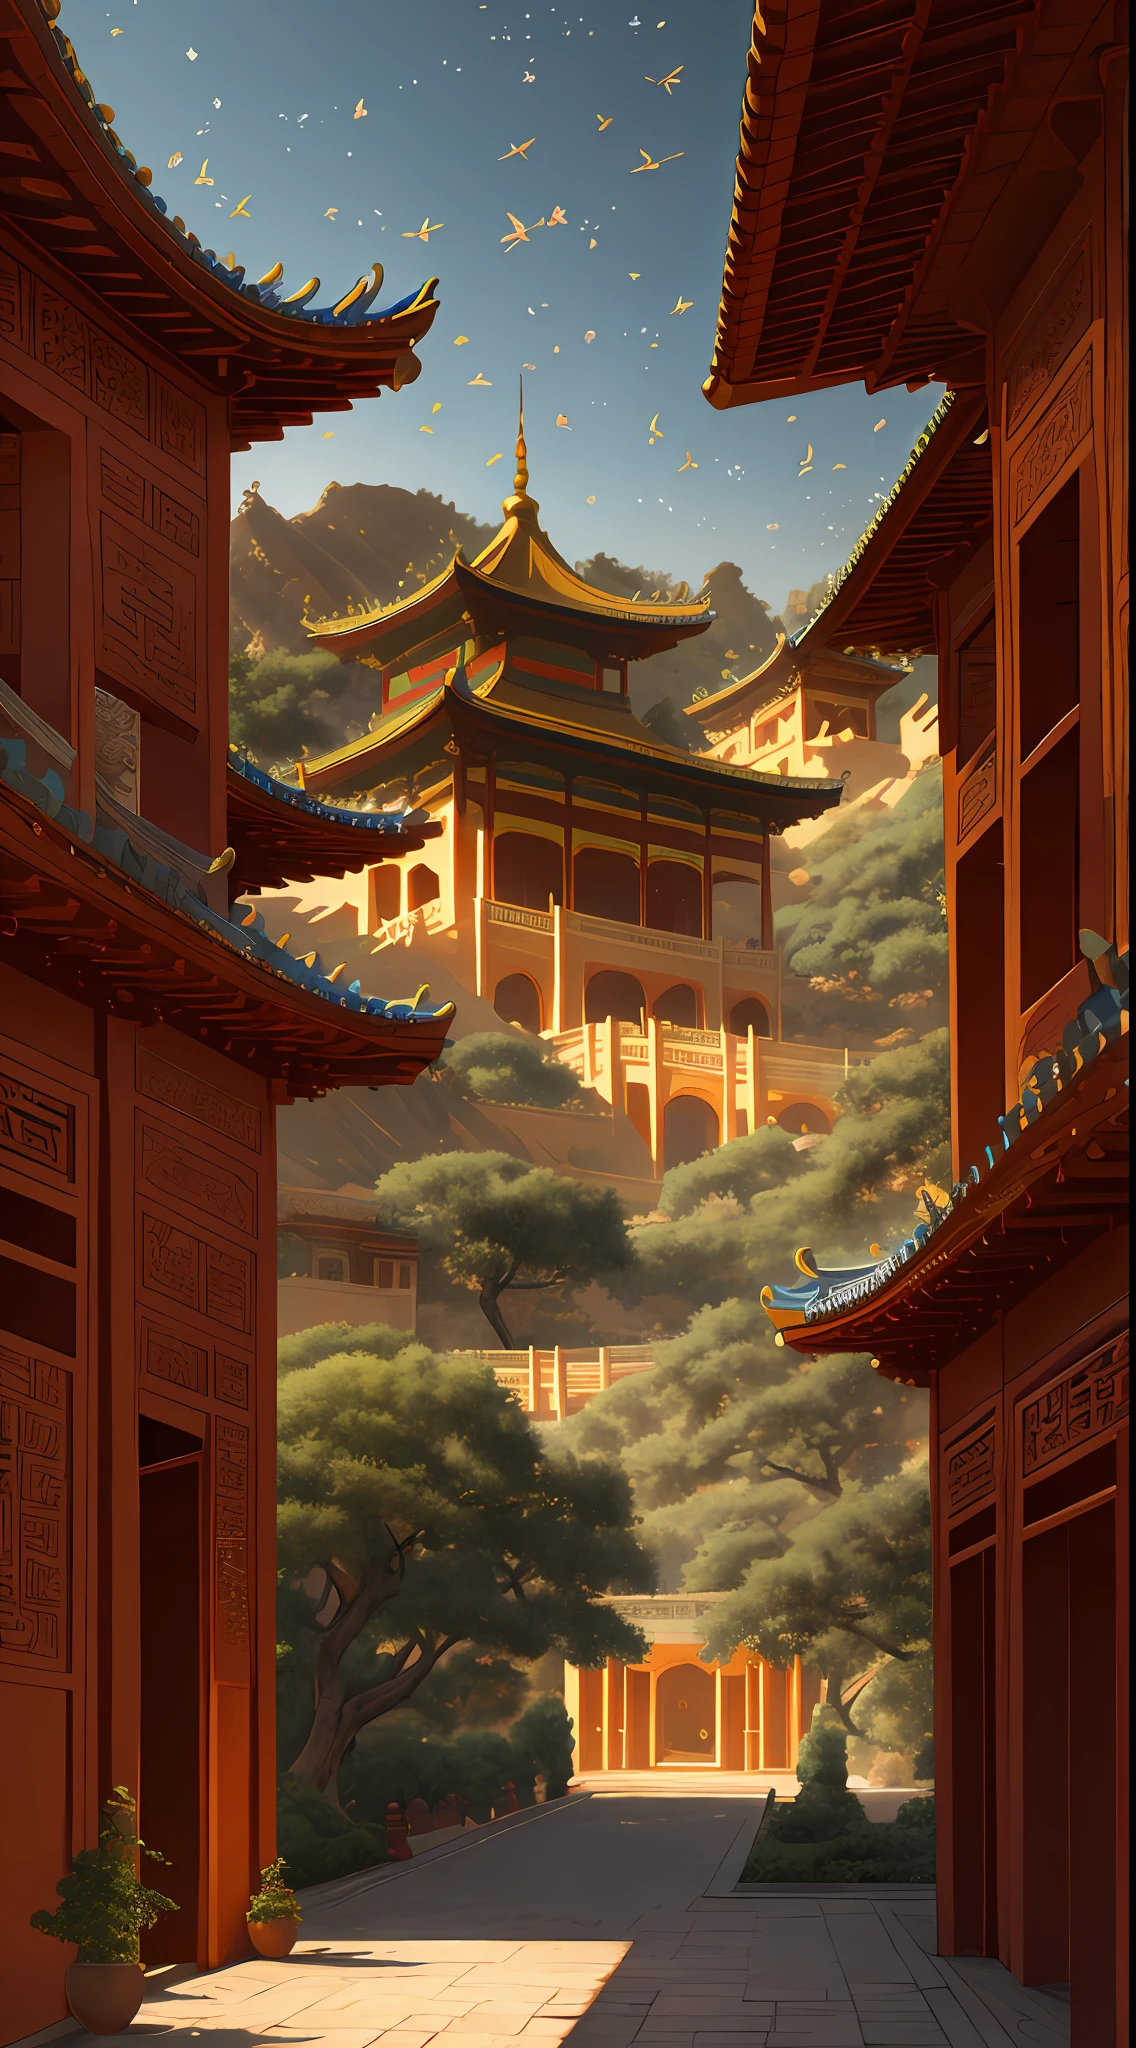 Palace, vines everywhere, huge and damp trees, masterpieces, best quality, very detailed CG unified 8k wallpaper, oil painting, Gobi desert, Dunhuang flying sky, flying fairy in light yarn, background bokeh, depth of field, HDR, realism, very delicate, high detail, traditional Chinese style, Chinese style art, stereo lighting